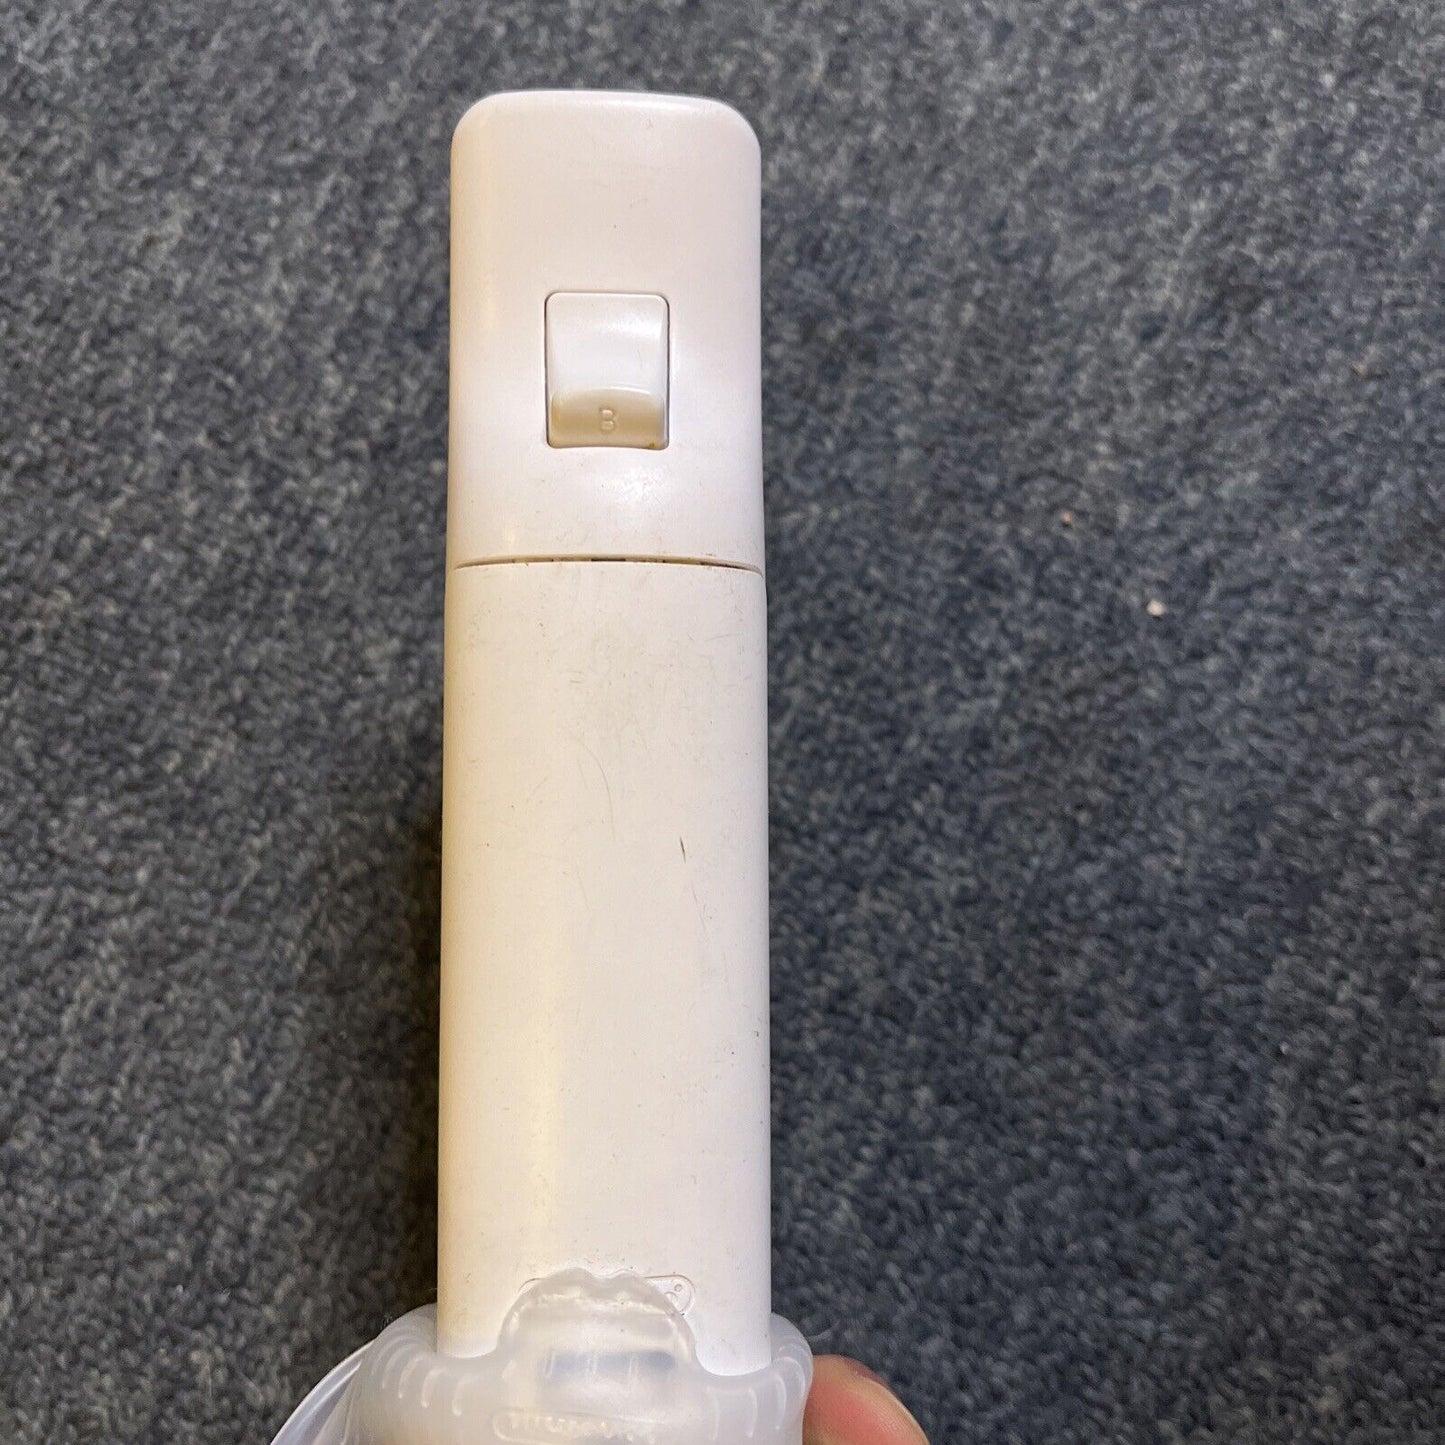 Genuine Nintendo Wii Remote With Motion Plus + Cover White